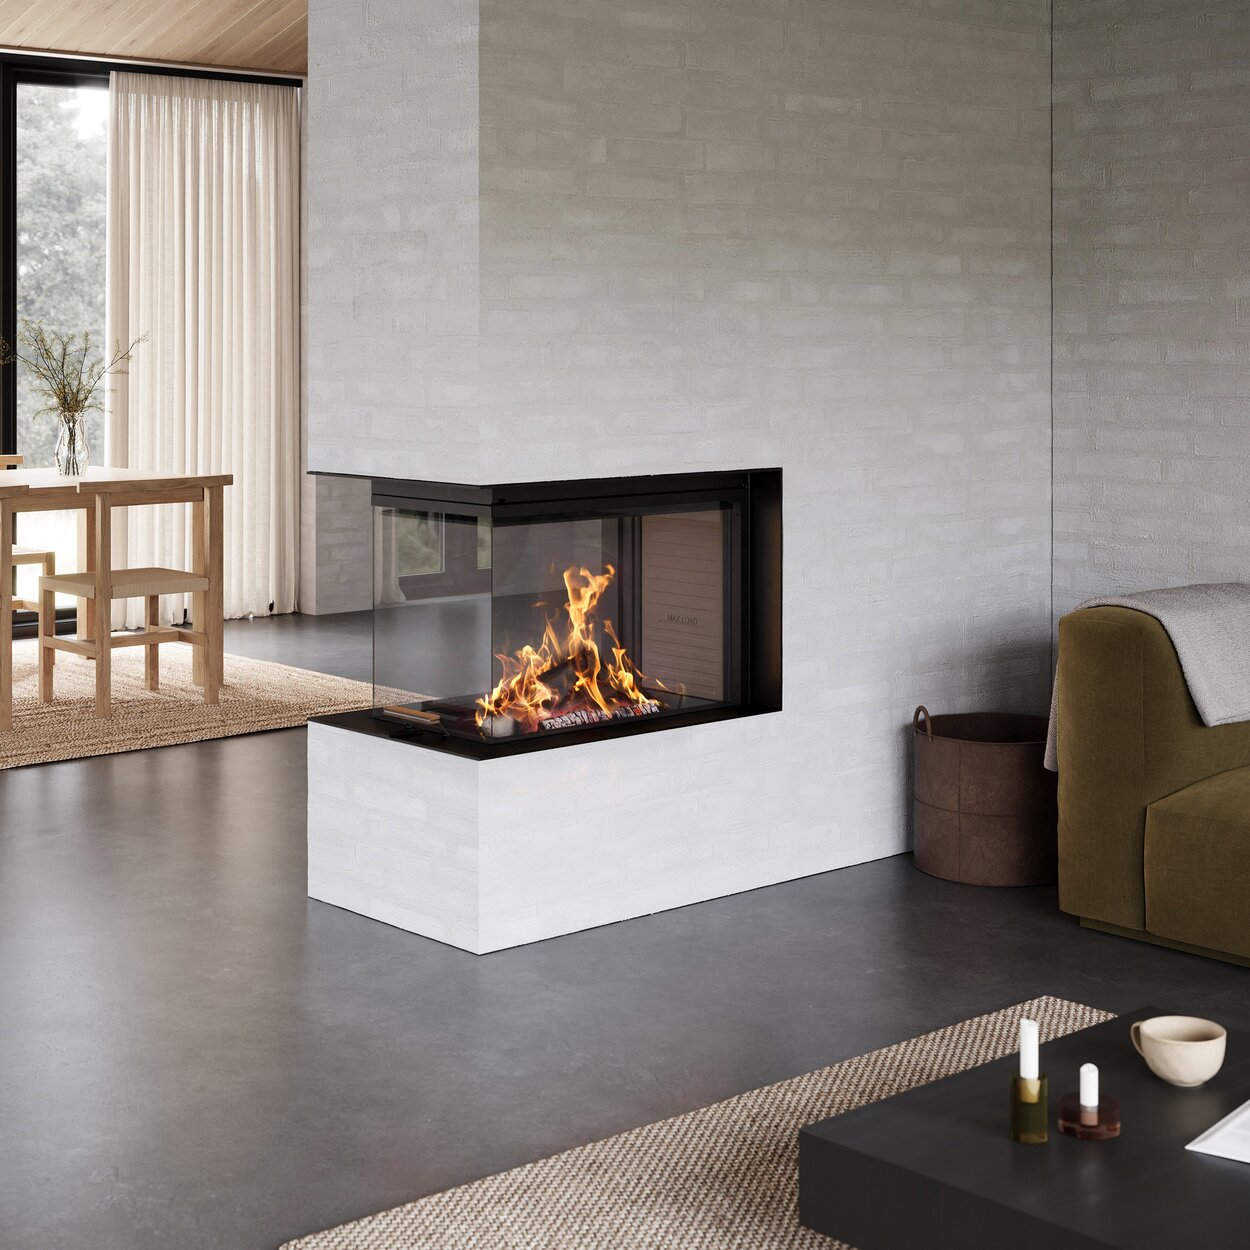 Wood fireplace VISIO 3:1 UNIQ as a room divider between the dining room and living room